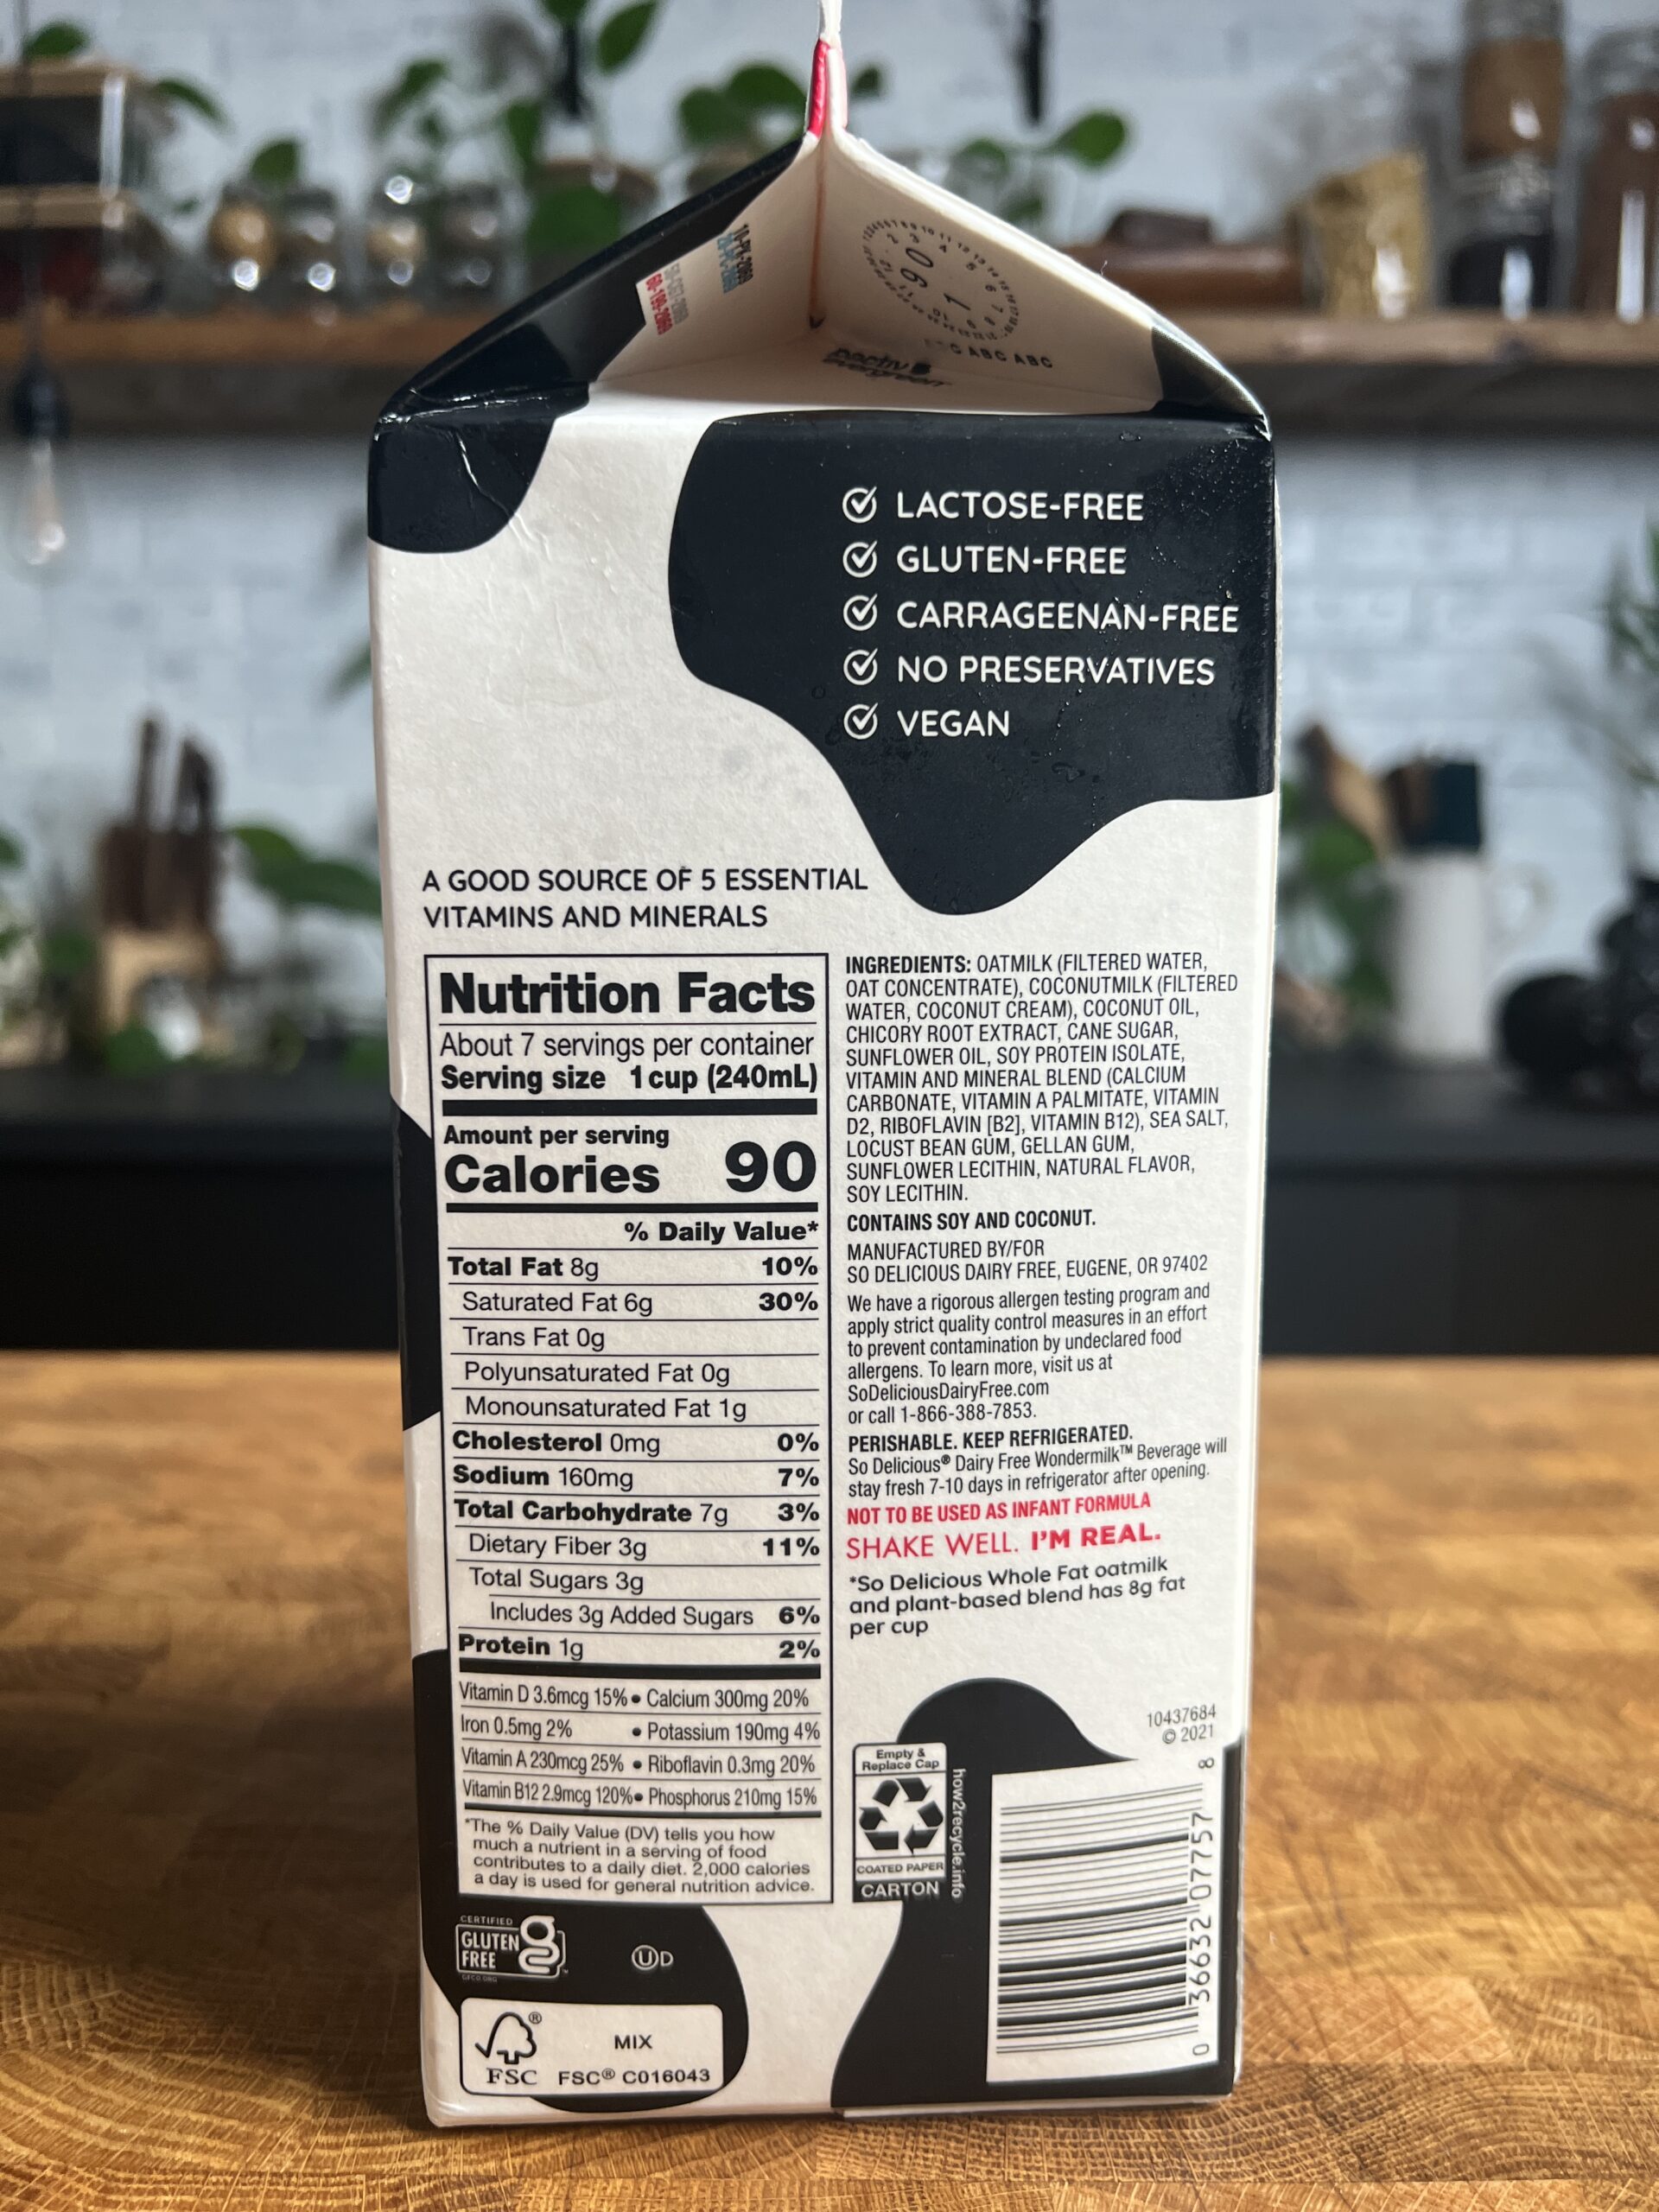 So delicious whole fat Wondermilk with nutrition facts.